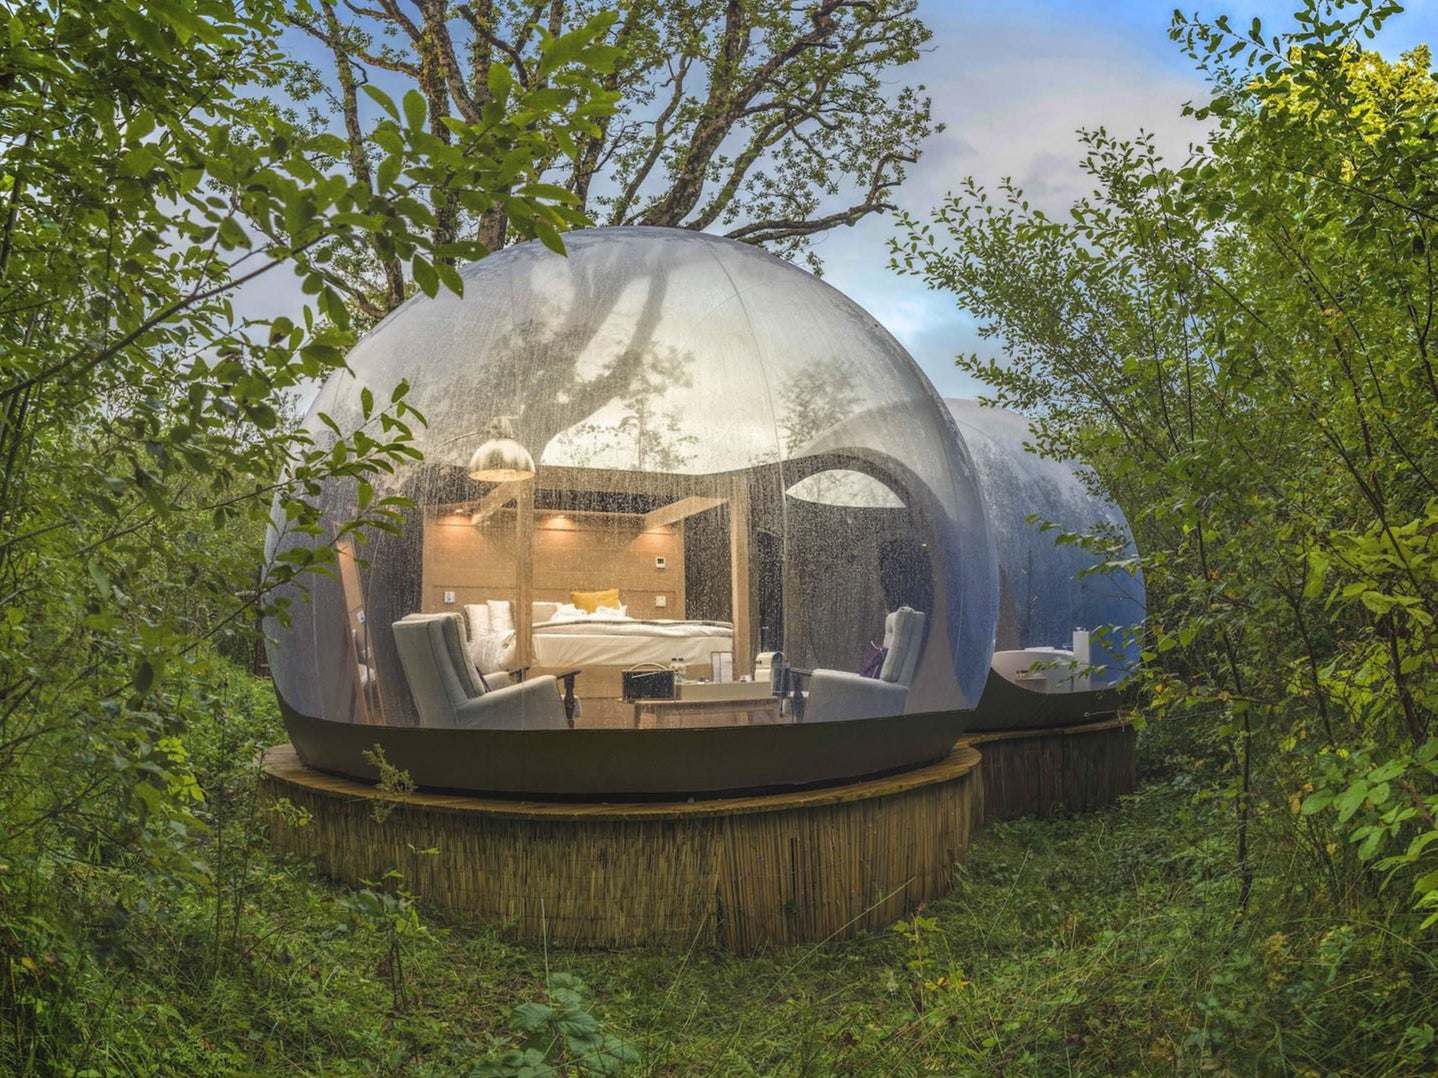 Bubble domes offer 360-degree views